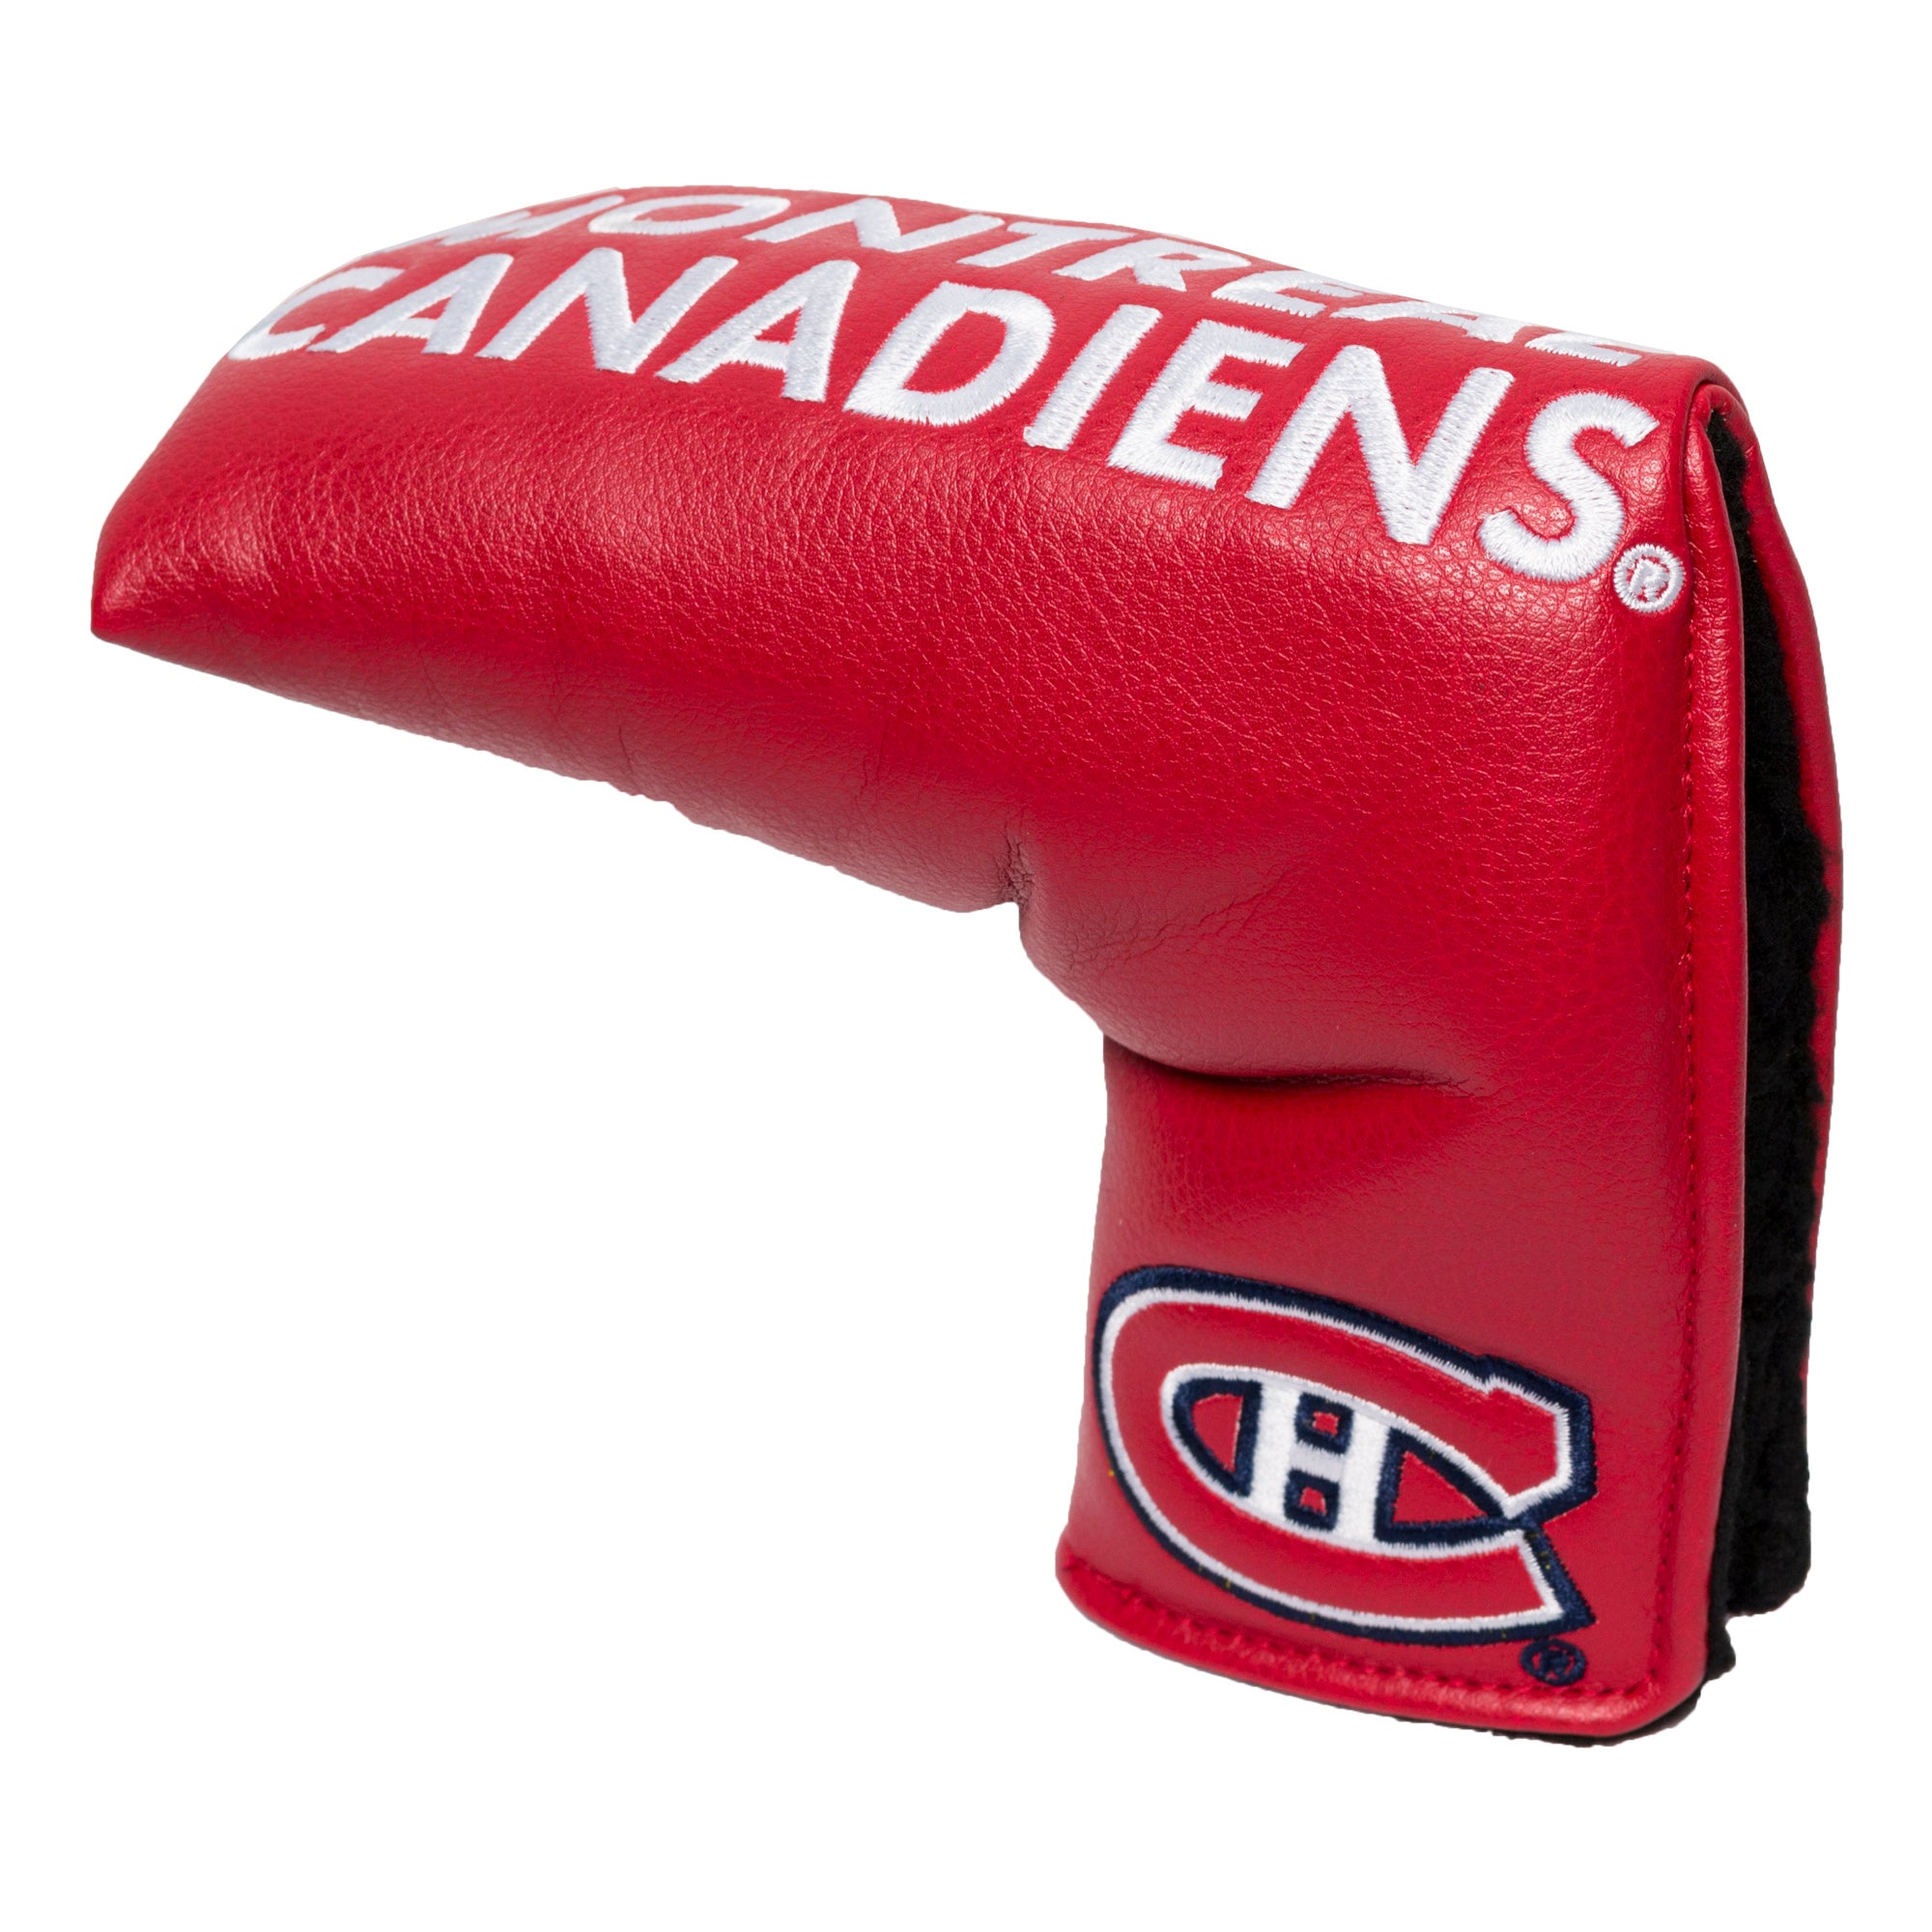 Montreal Canadiens Tour Blade Putter Cover